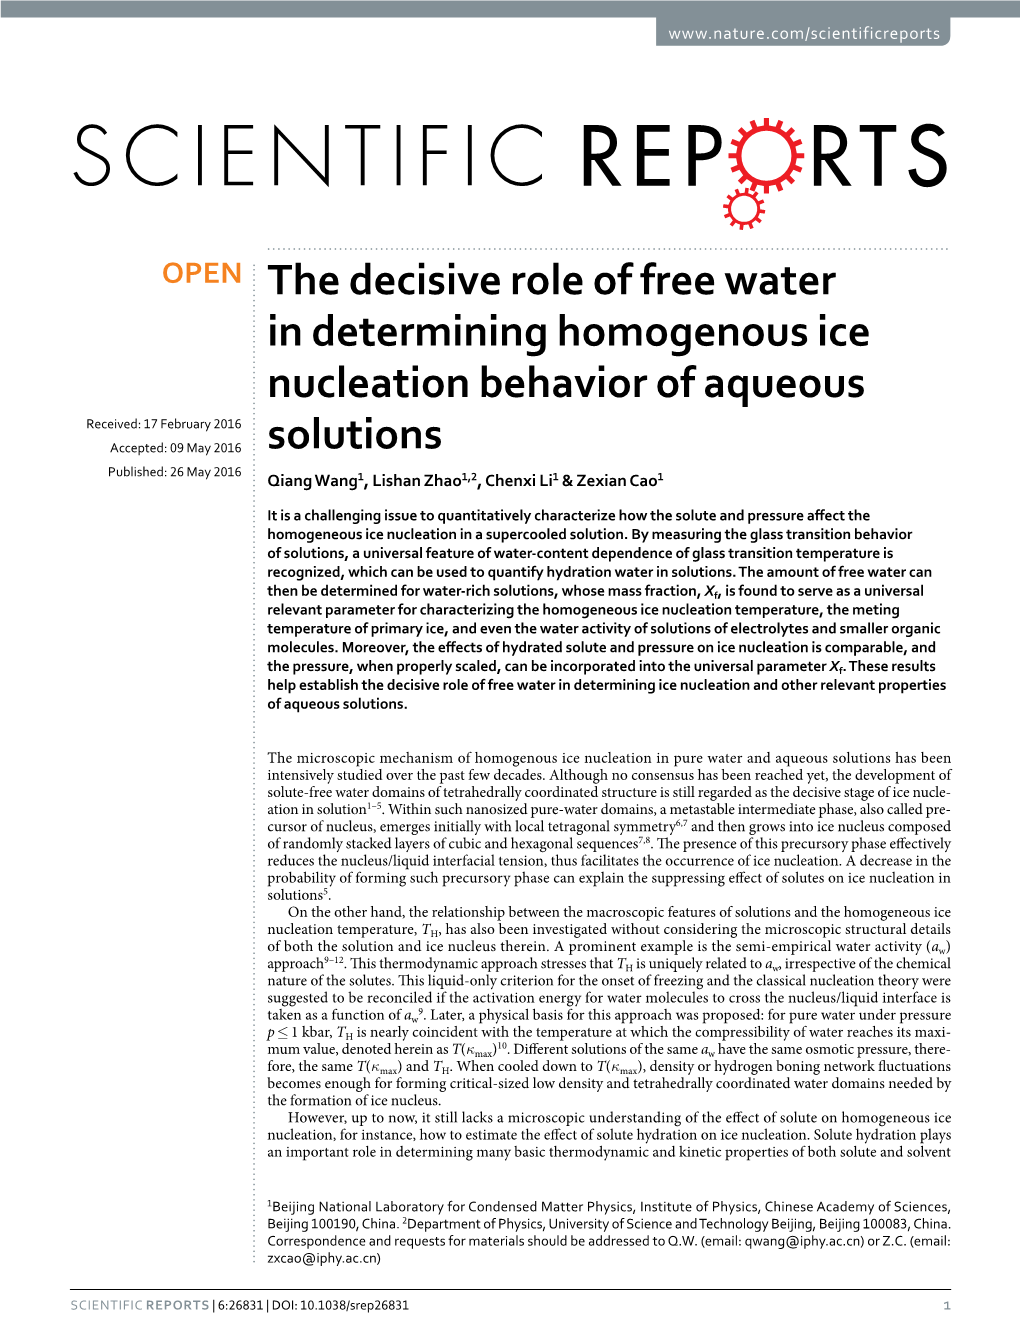 The Decisive Role of Free Water in Determining Homogenous Ice